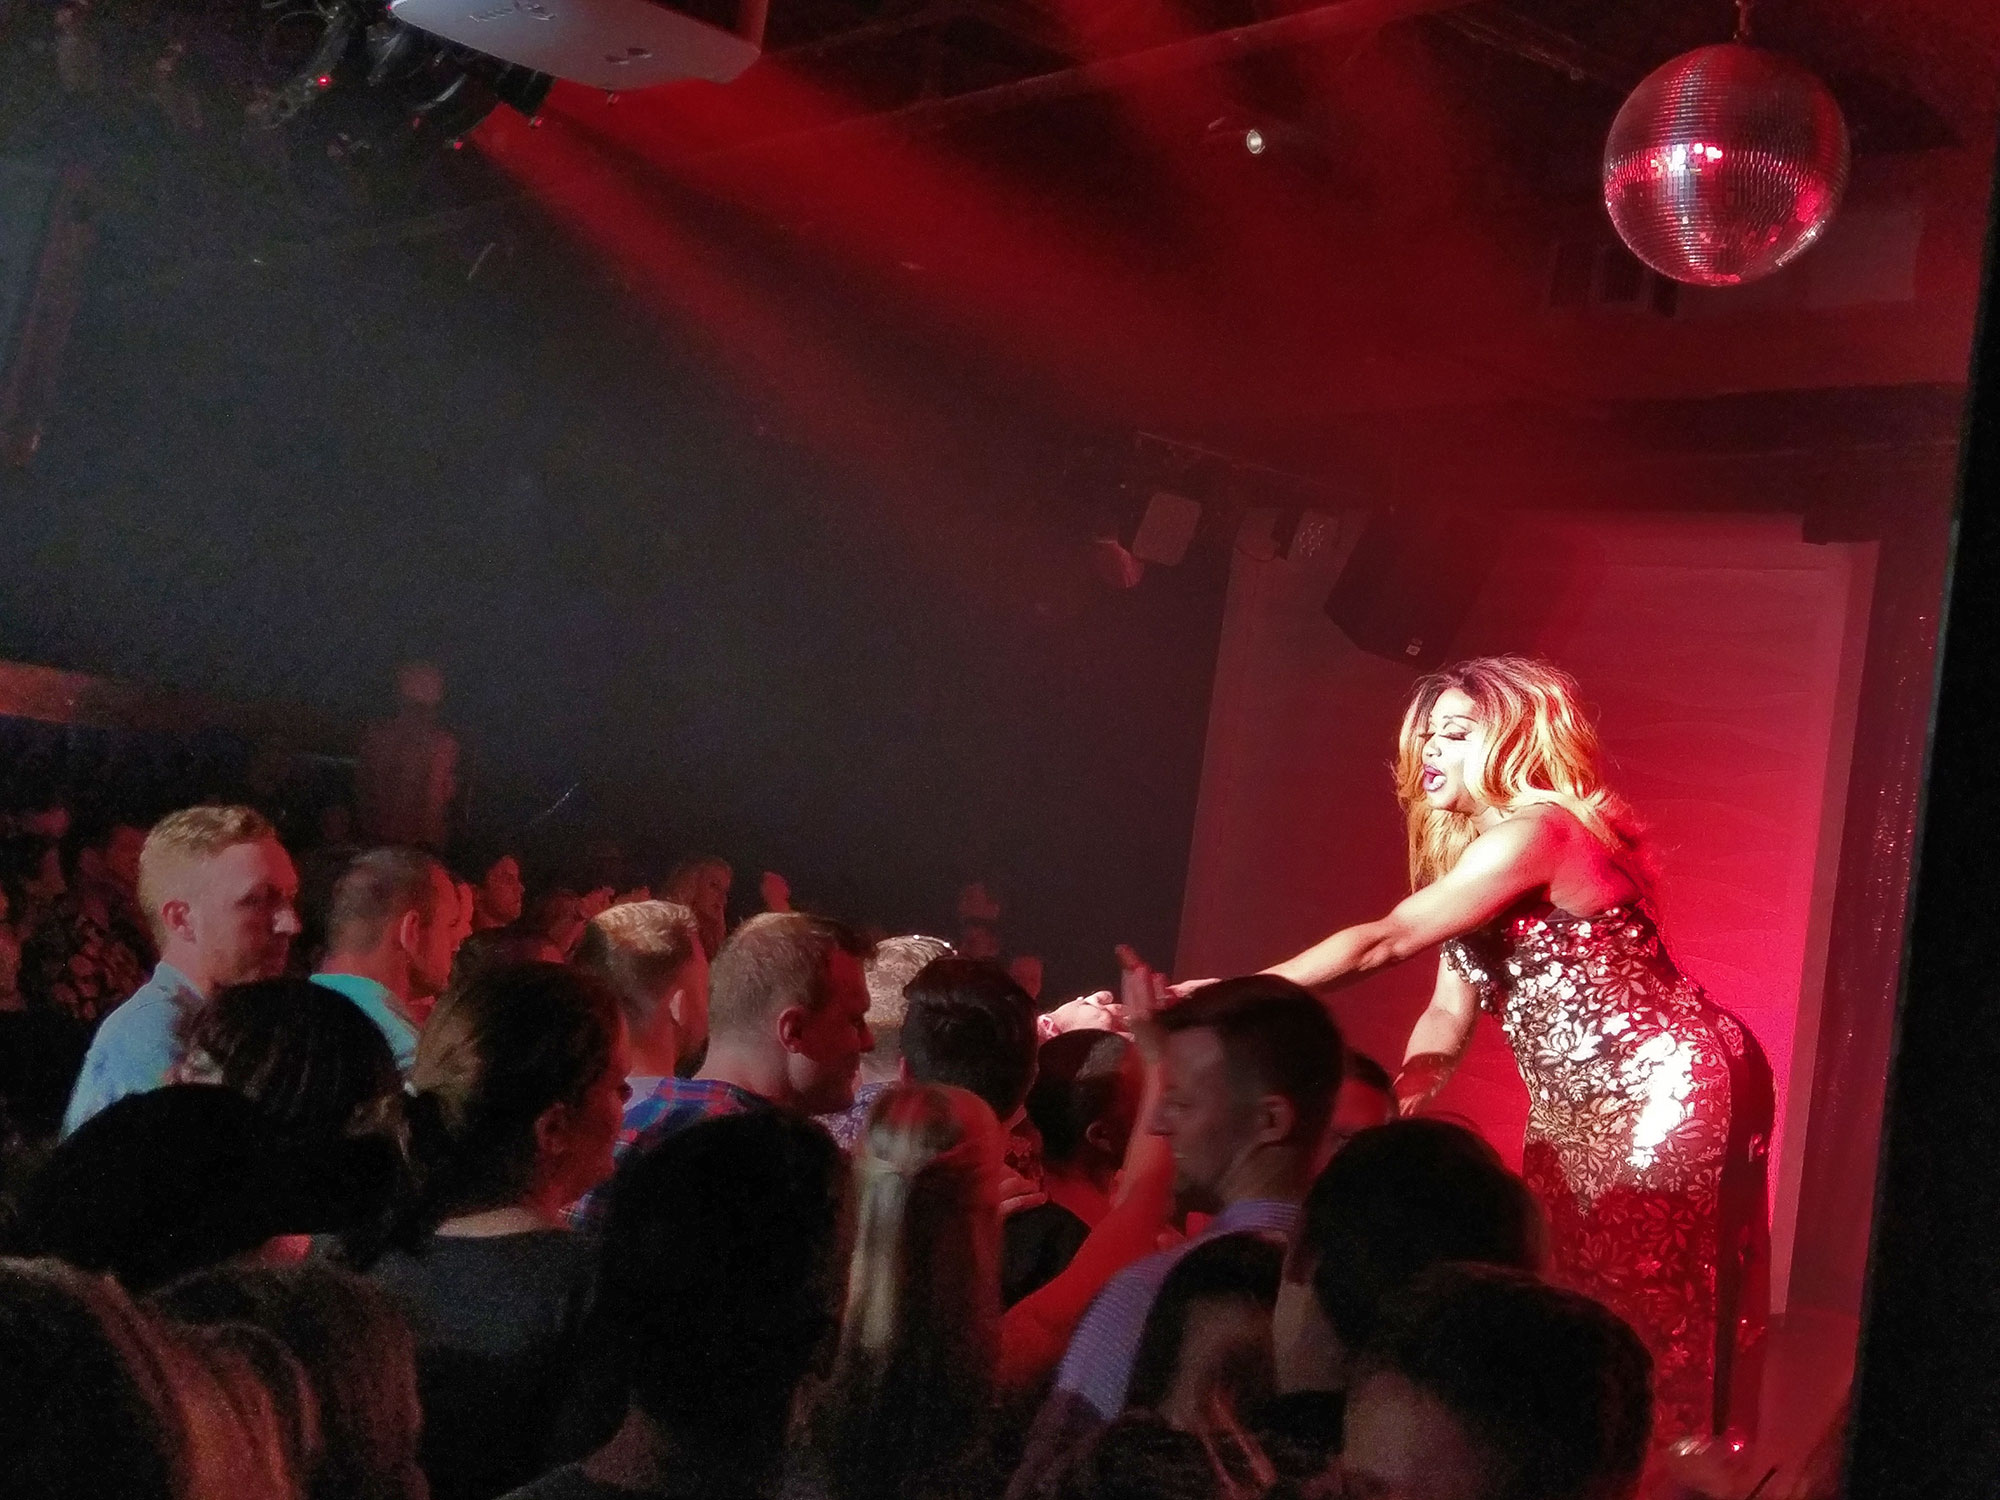 A drag queen performing at Play nightclub in Nashville.